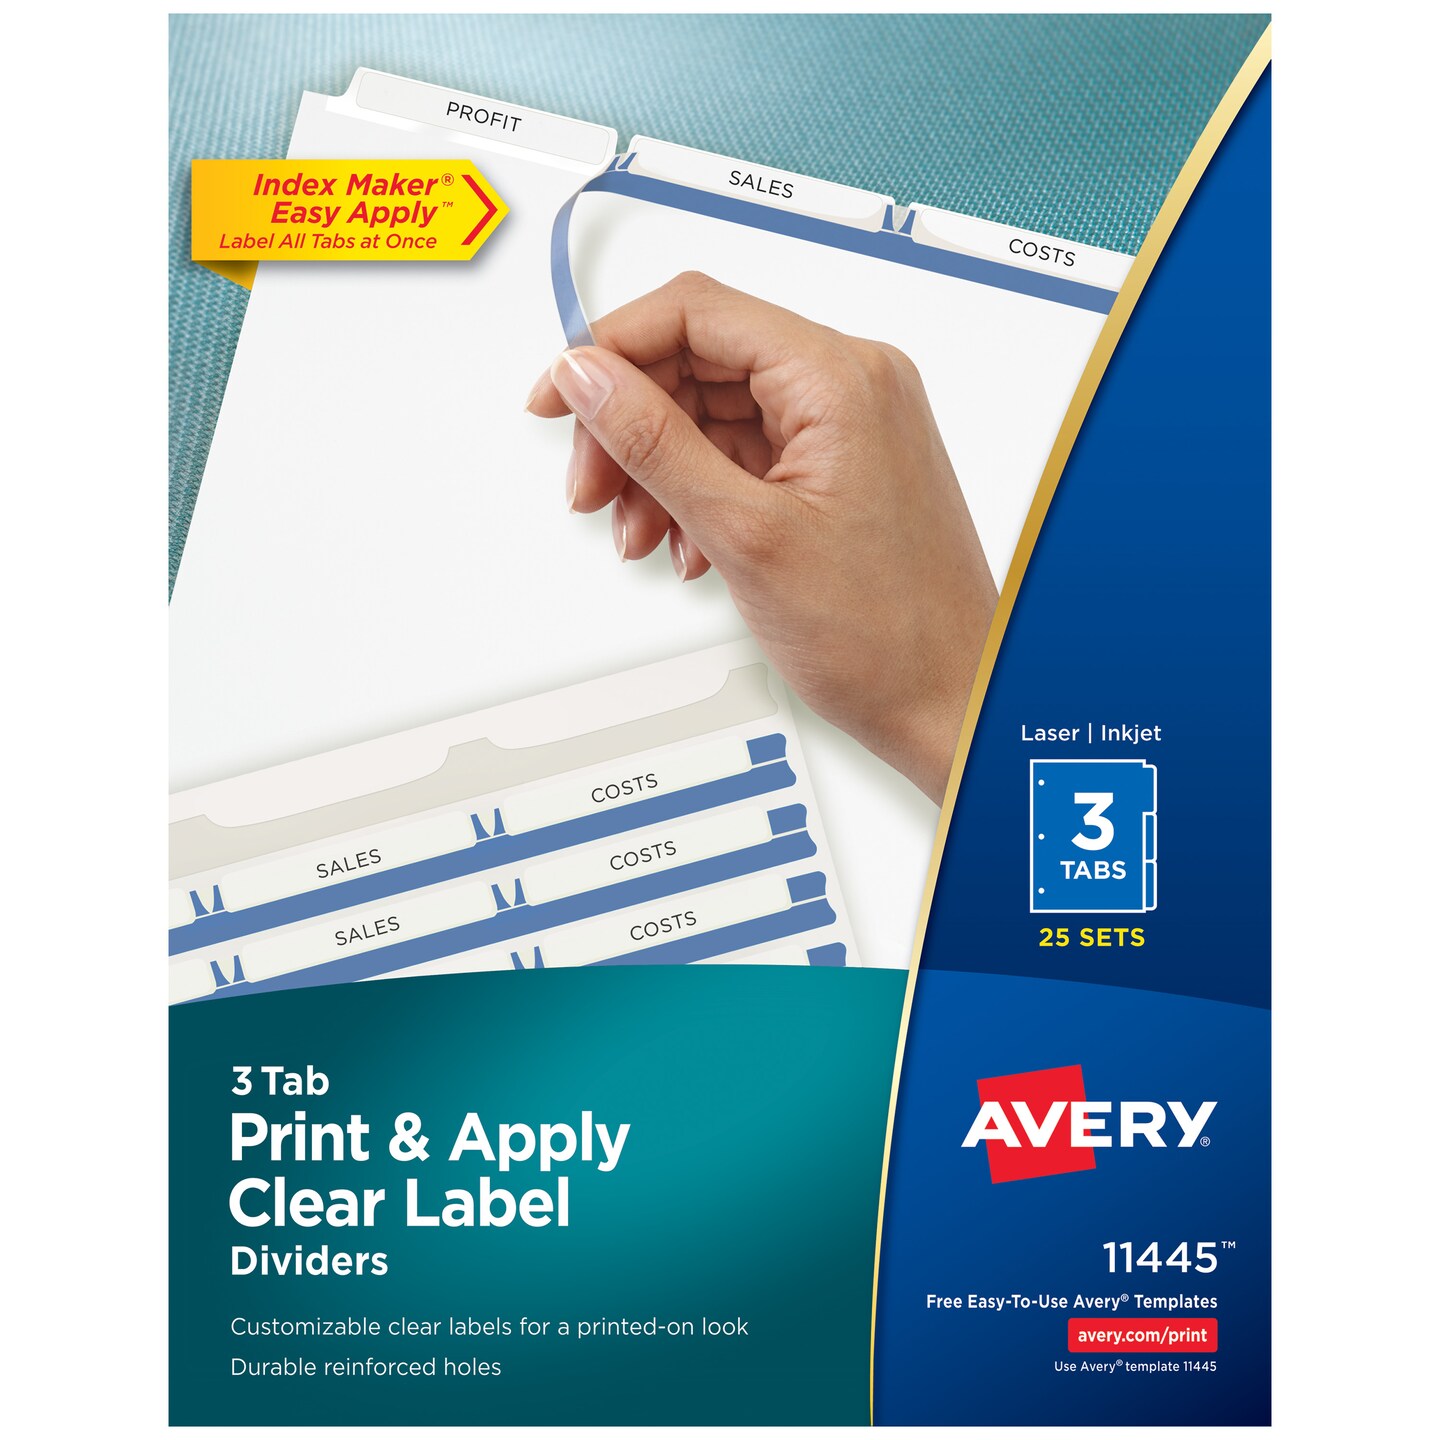 Avery 3-Tab Dividers for 3 Ring Binder, Easy Print & Apply Clear Label  Strip, Index Maker Customizable White Tabs, 25 Sets (11445)